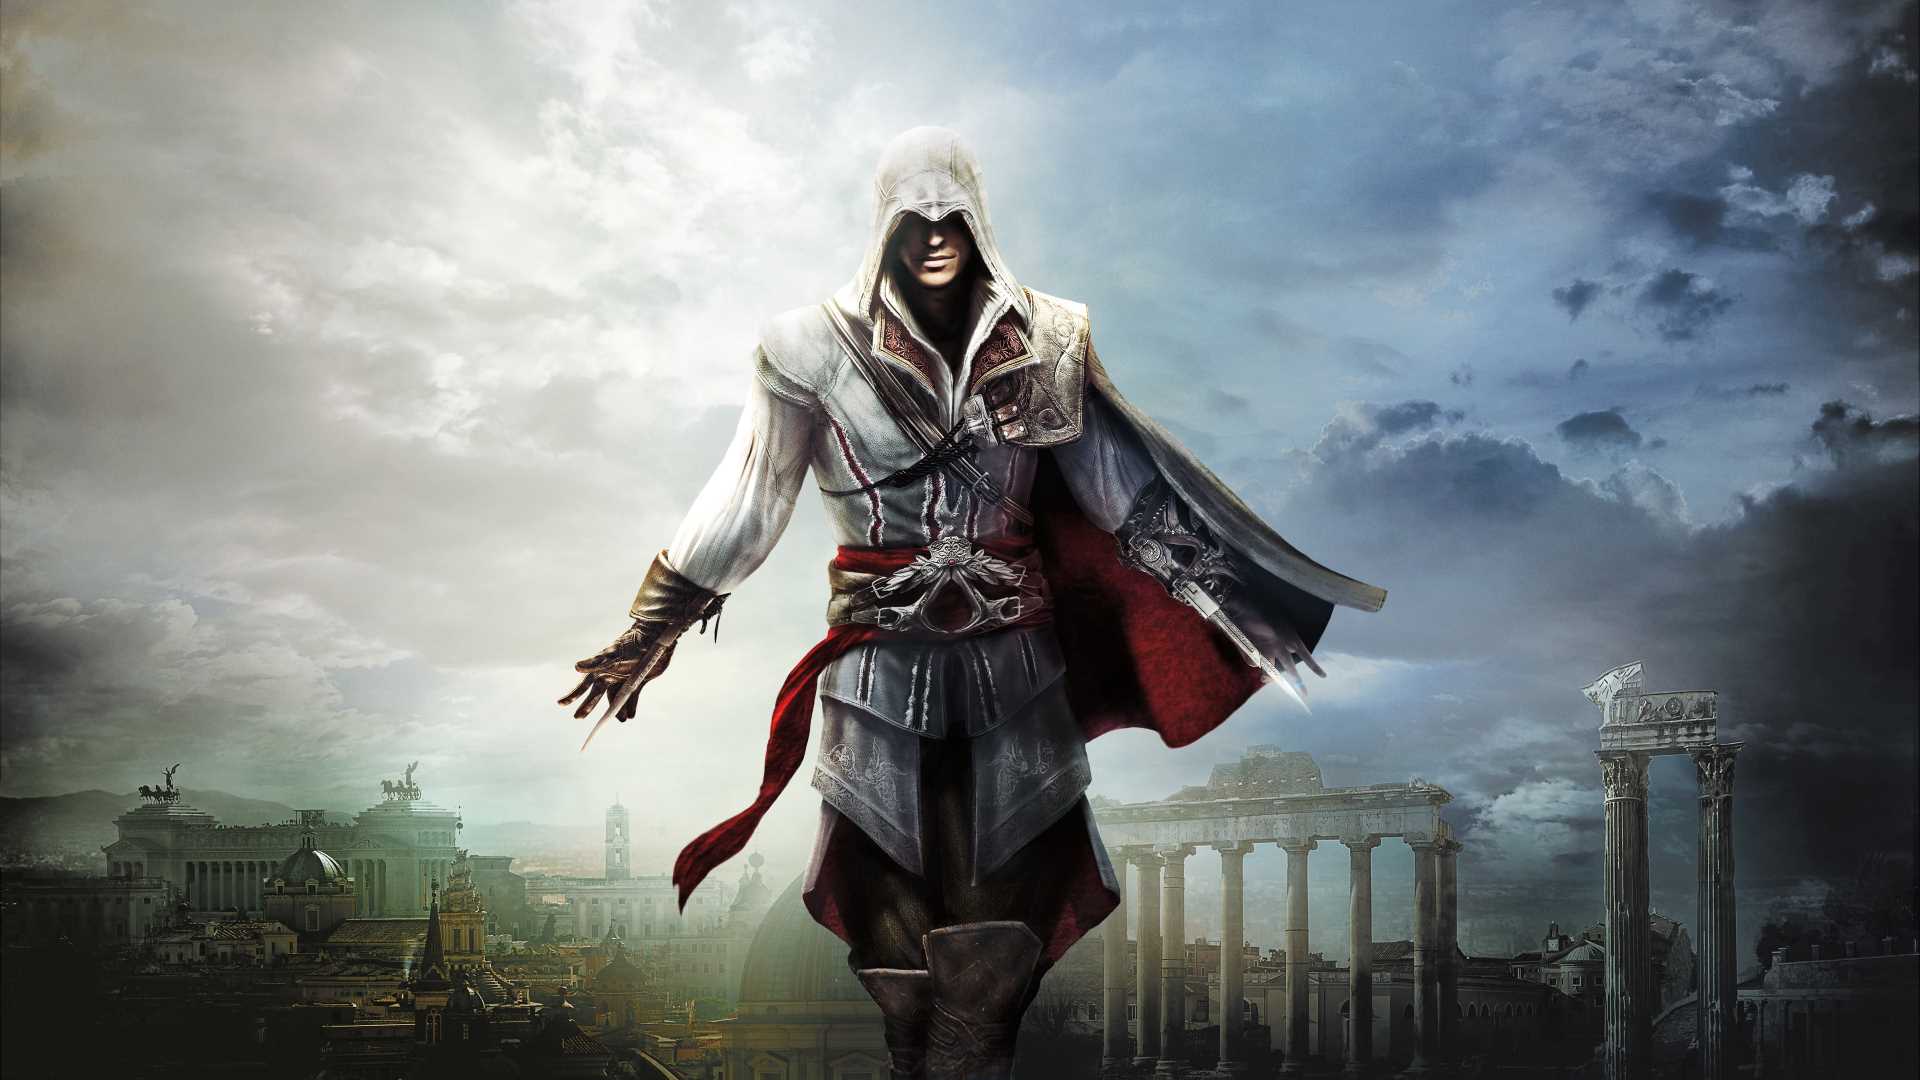 Review: Why Assassin's Creed Fails